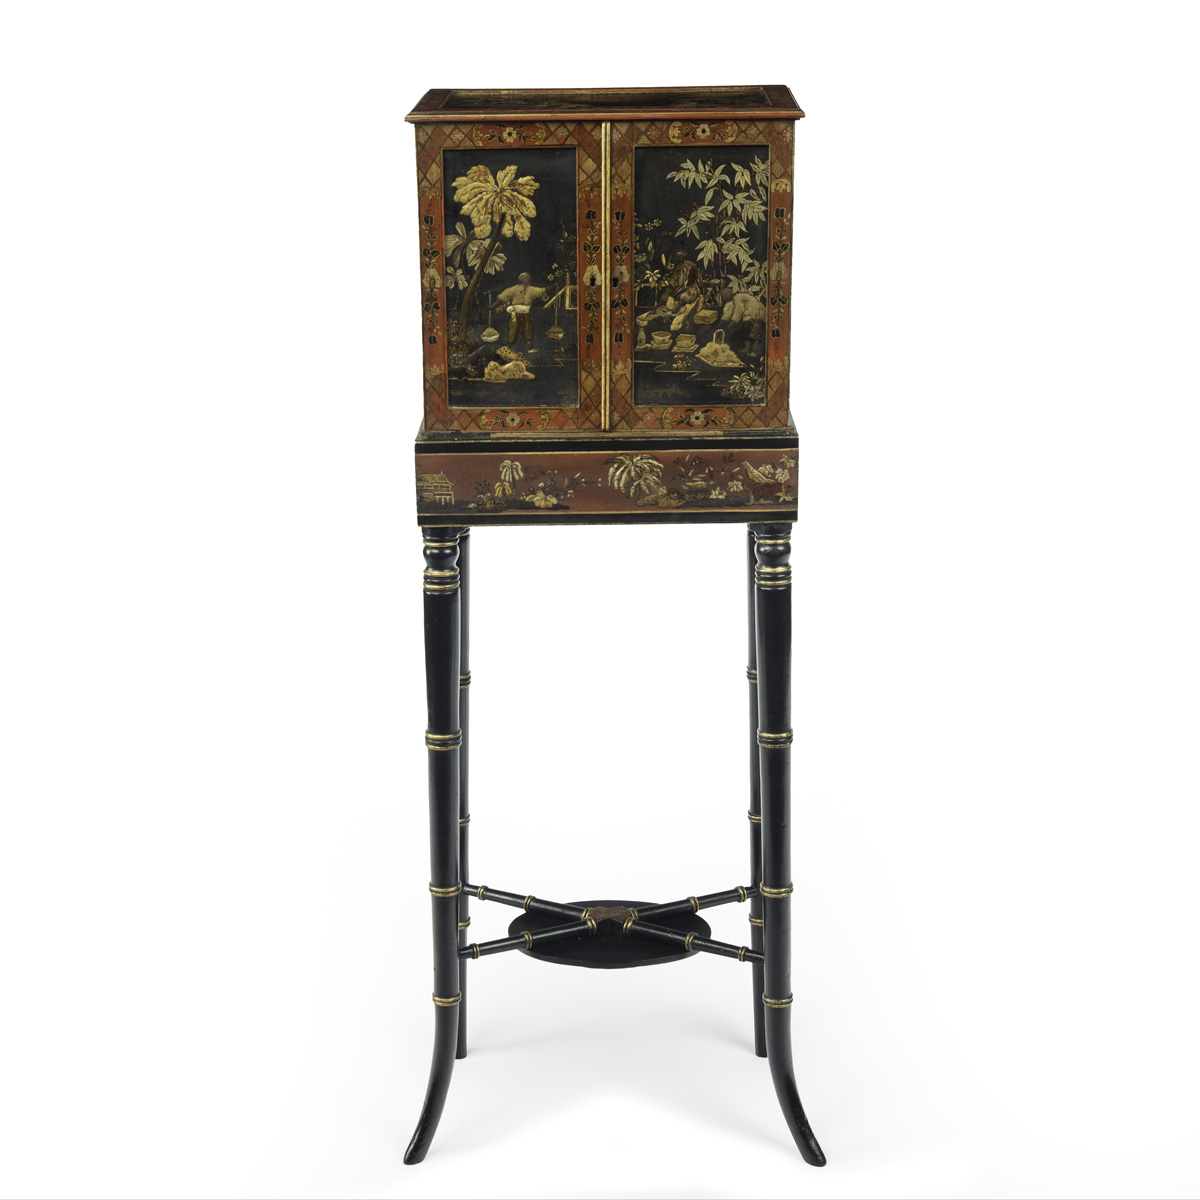 A delicate Regency Chinoiserie lacquer cabinet,